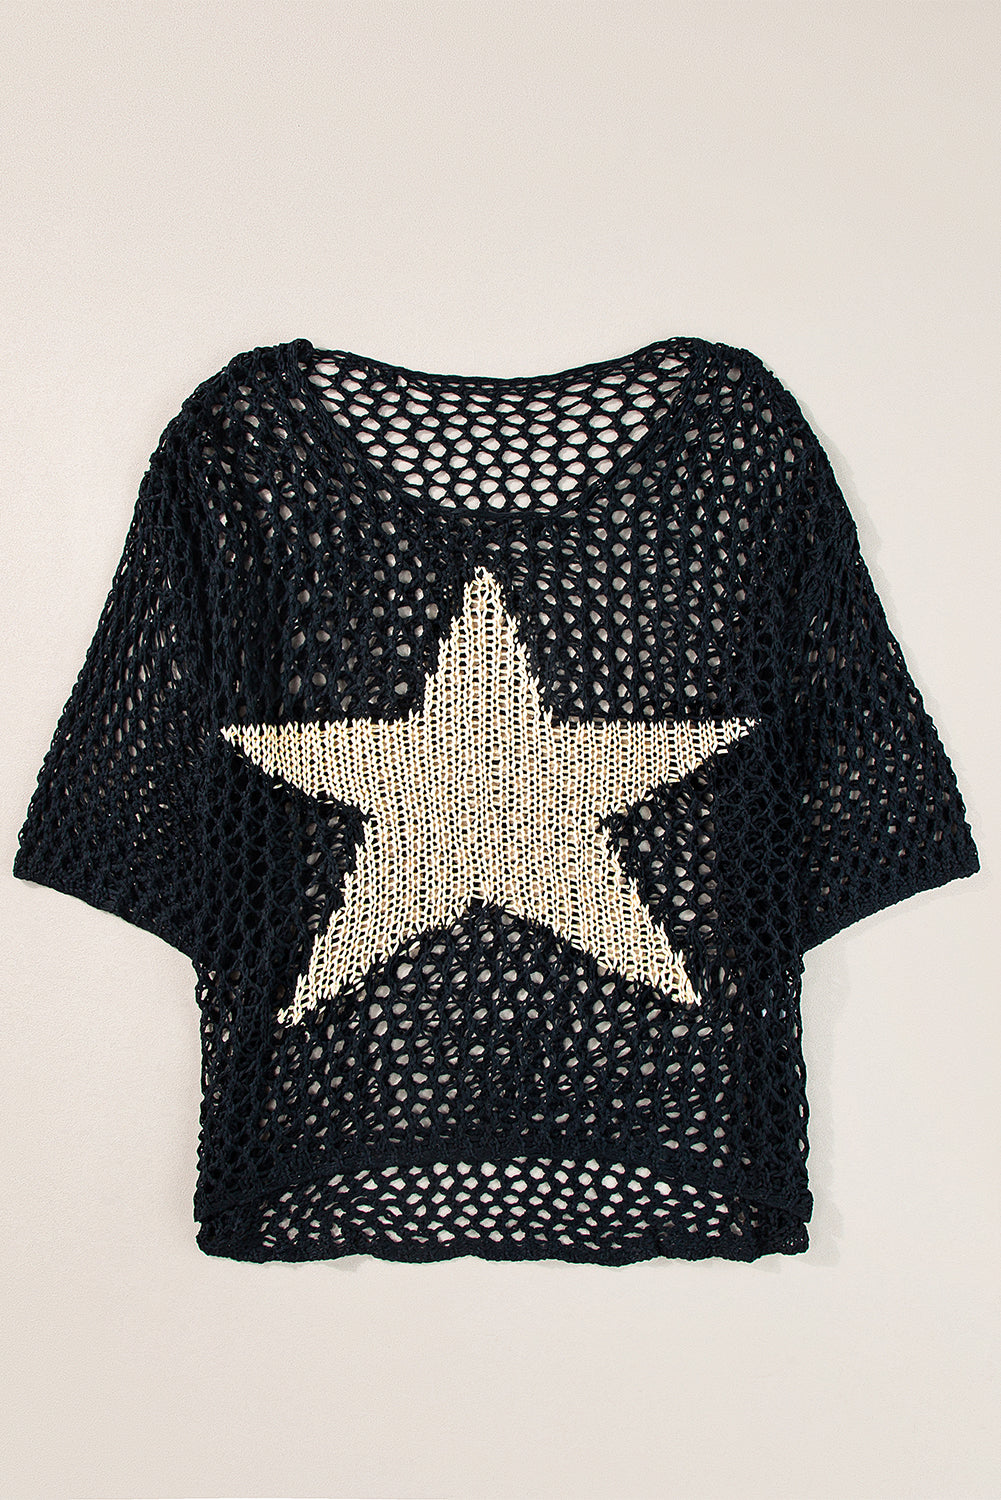 White Star Graphic Crochet Knitted Summer Sweater Top Blue Zone Planet